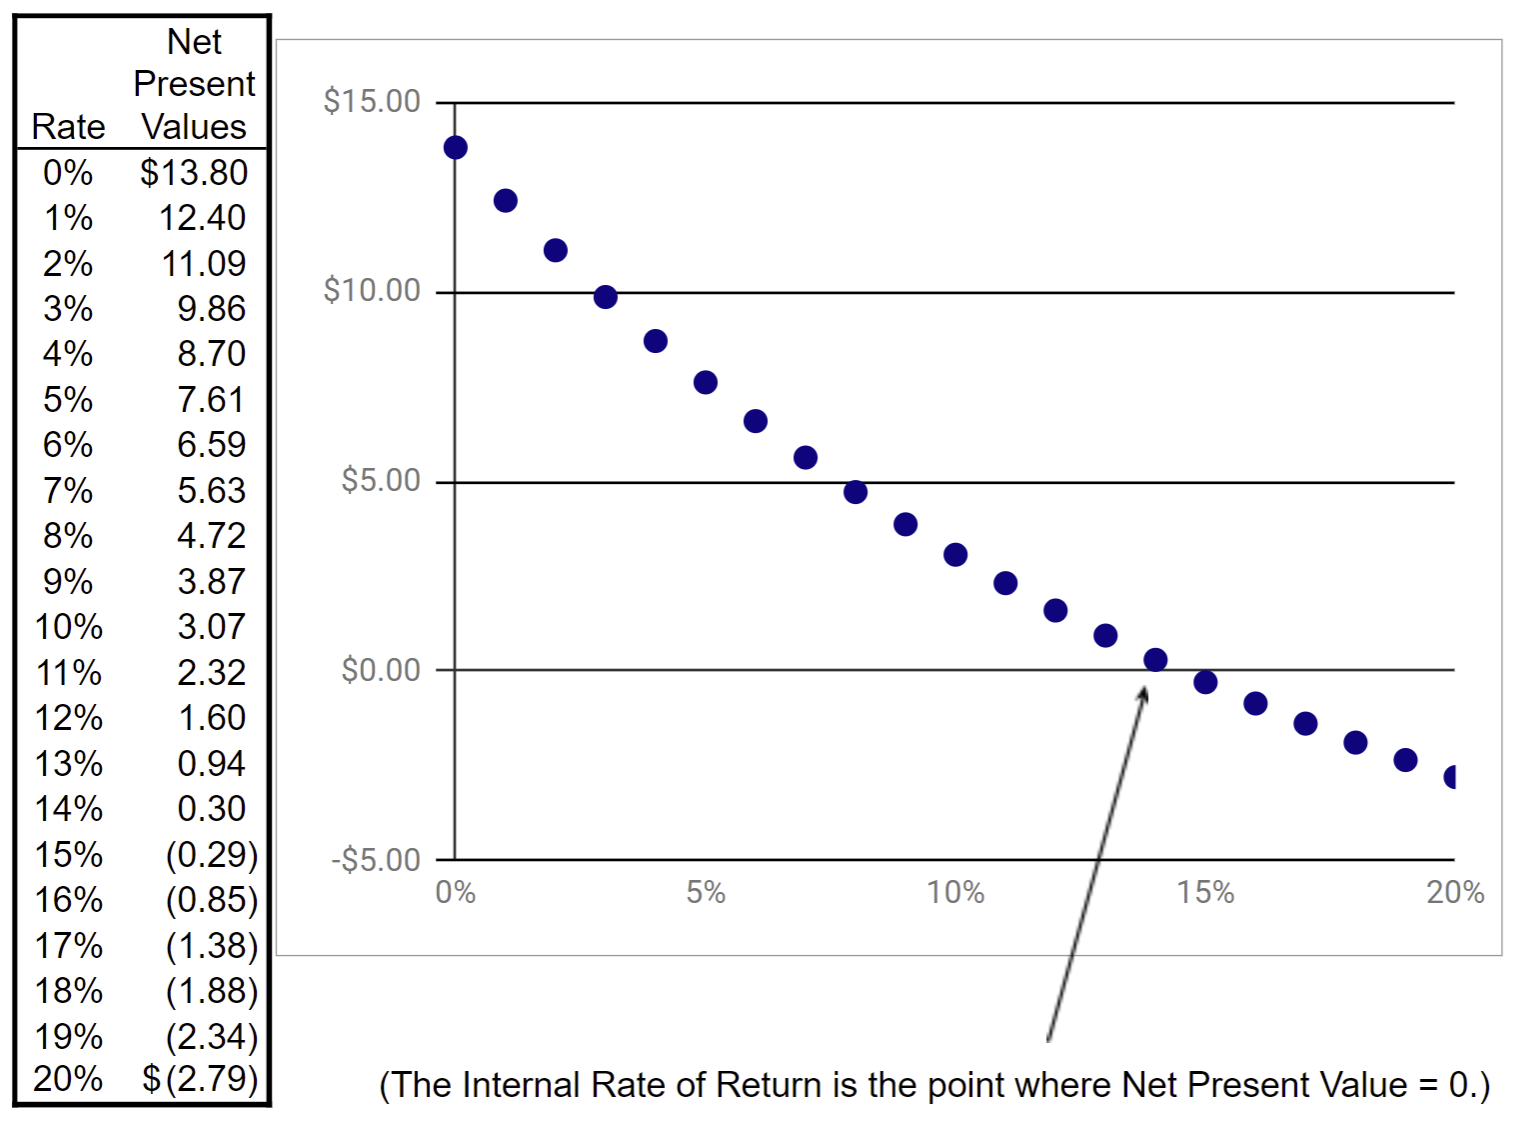 Here is another way of computing Internal Rate of Return. We create a table of Net Present Values for various Required Rates of Return. We then create a graph which shows us where the Net Present Value is zero. That is the Internal Rate of Return.